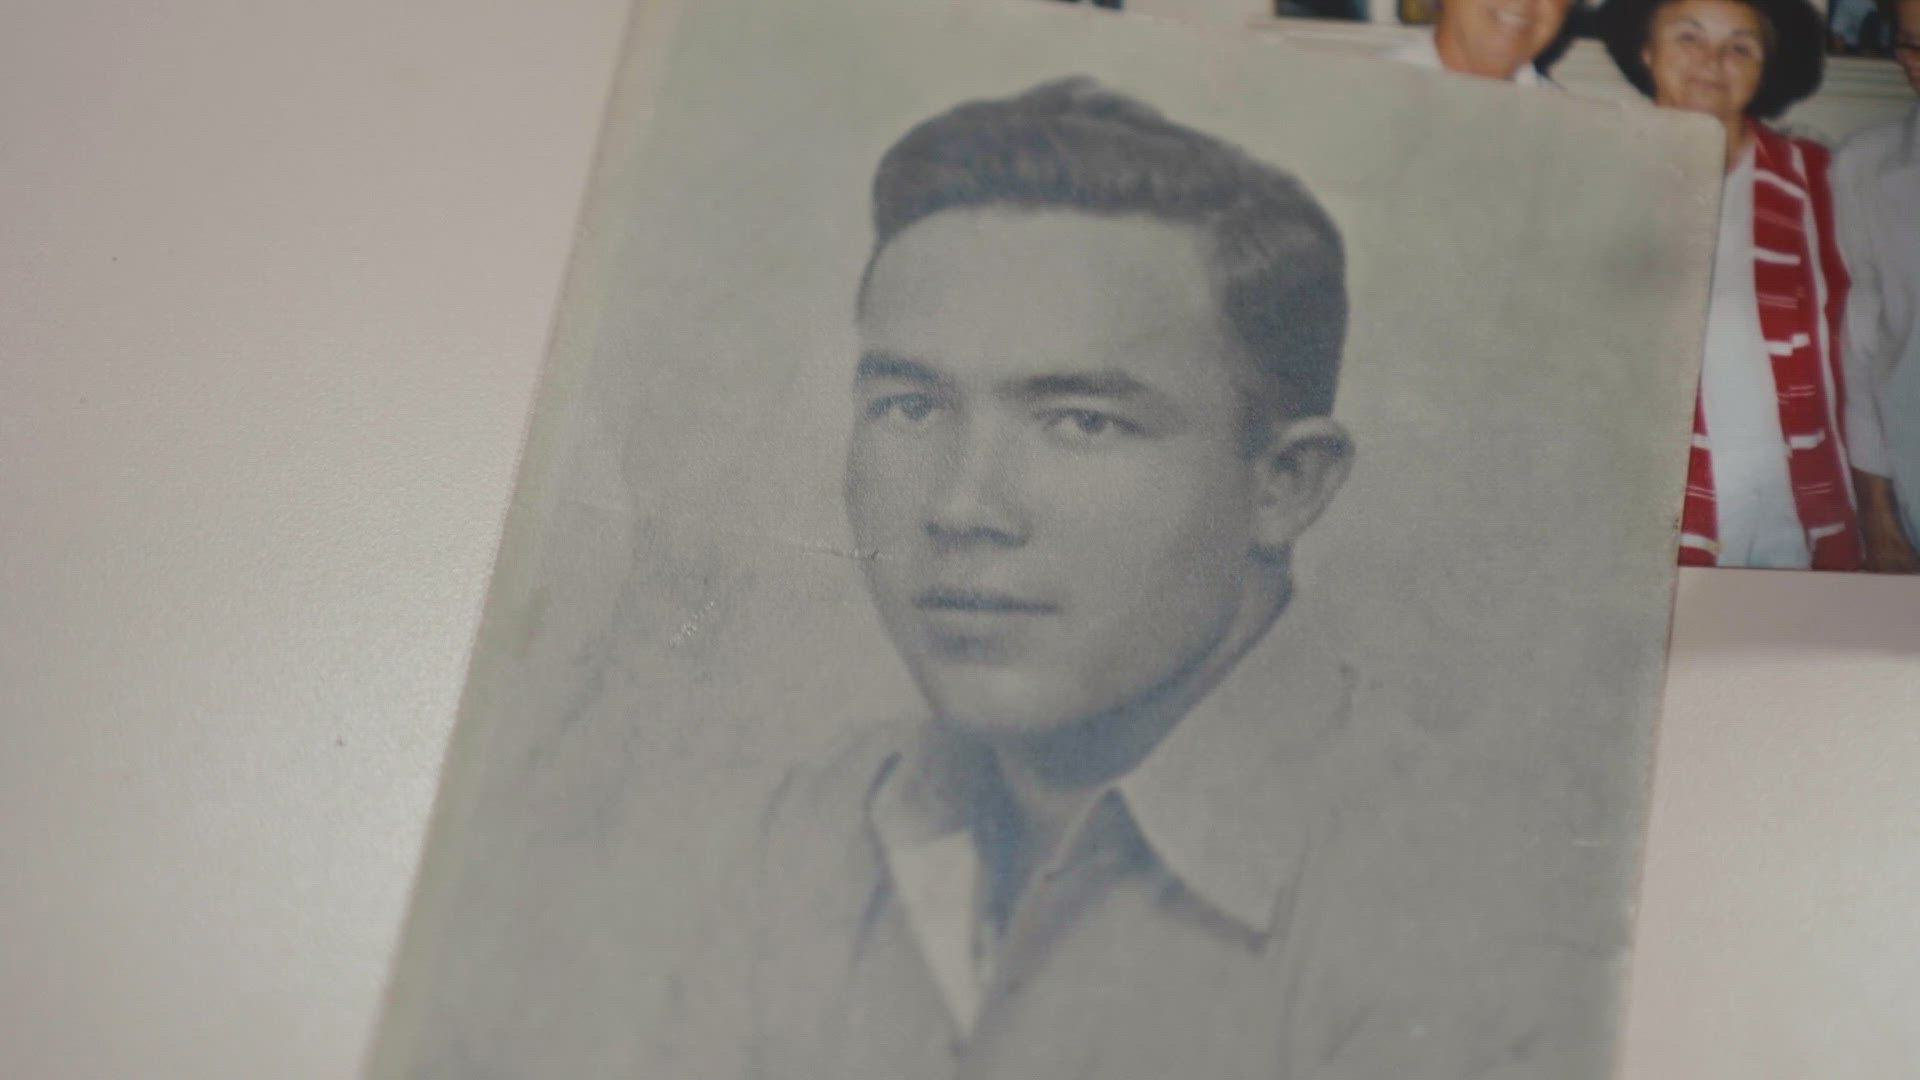 In 1944, a young Marine was last seen running toward an ammunition depot during the Battle of Saipan. For 80 years, his family never knew what happened — until now.